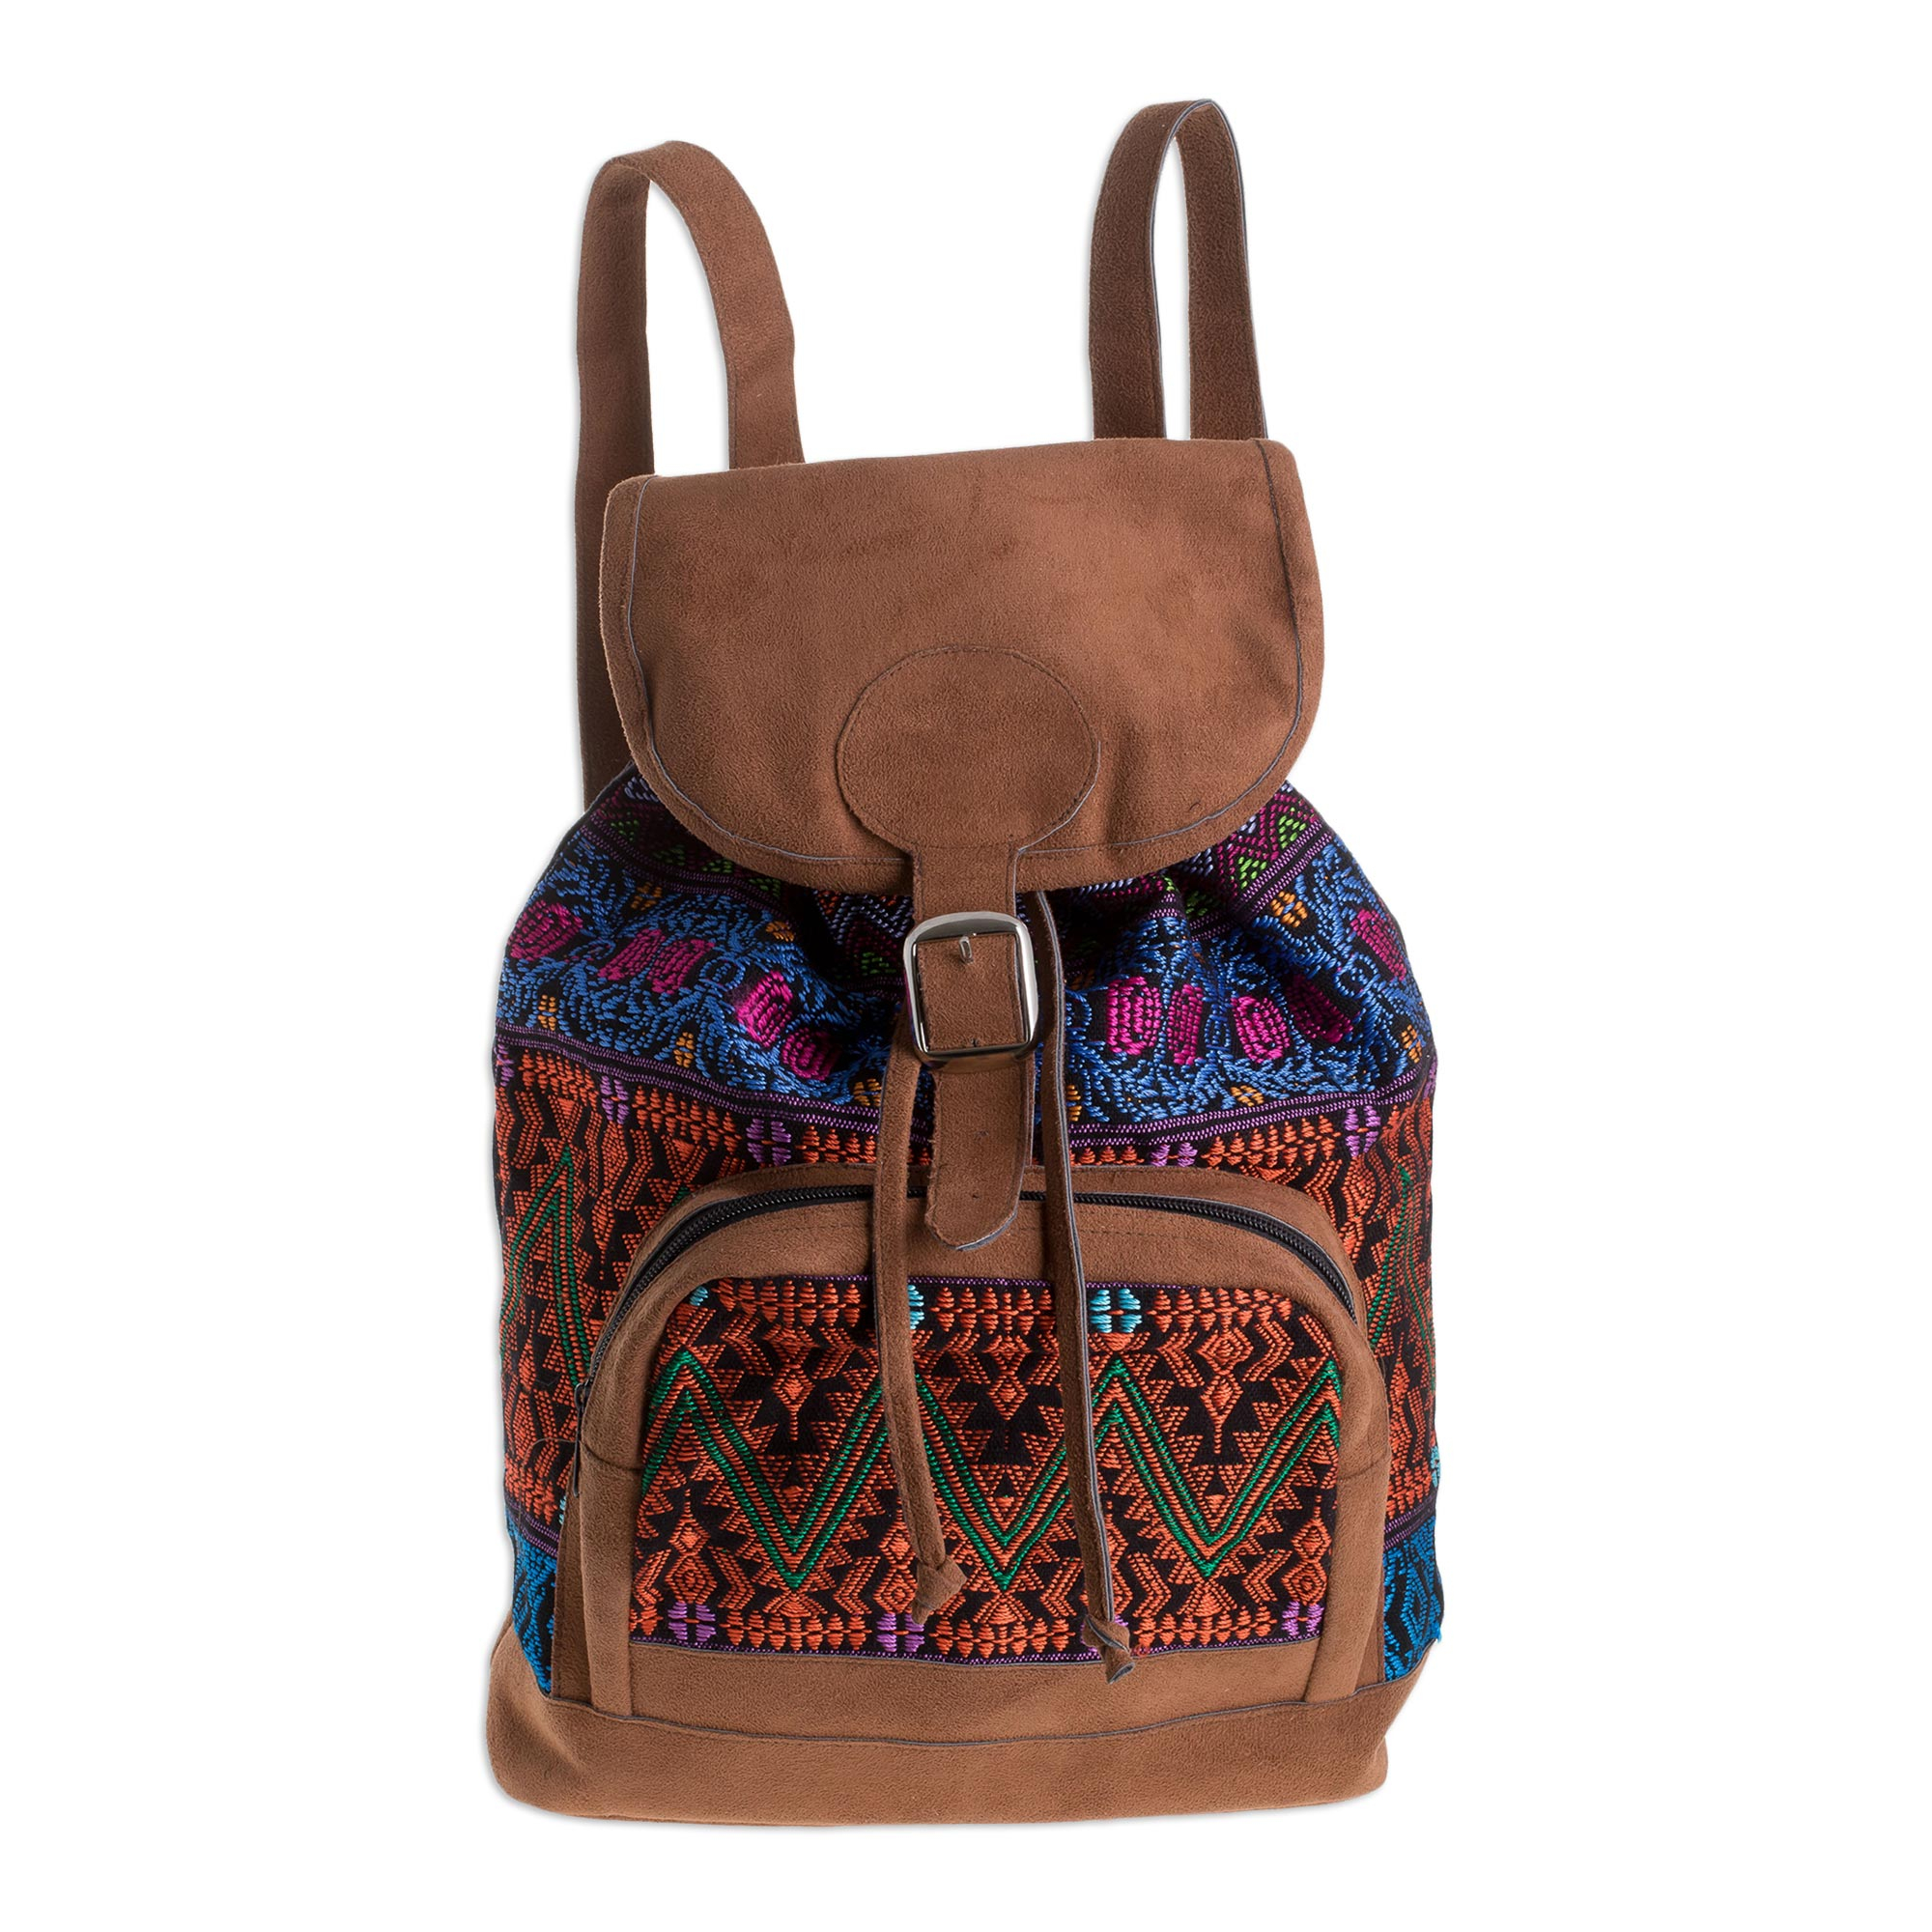 UNICEF Market | Handwoven Multicolored Cotton Backpack from Guatemala ...